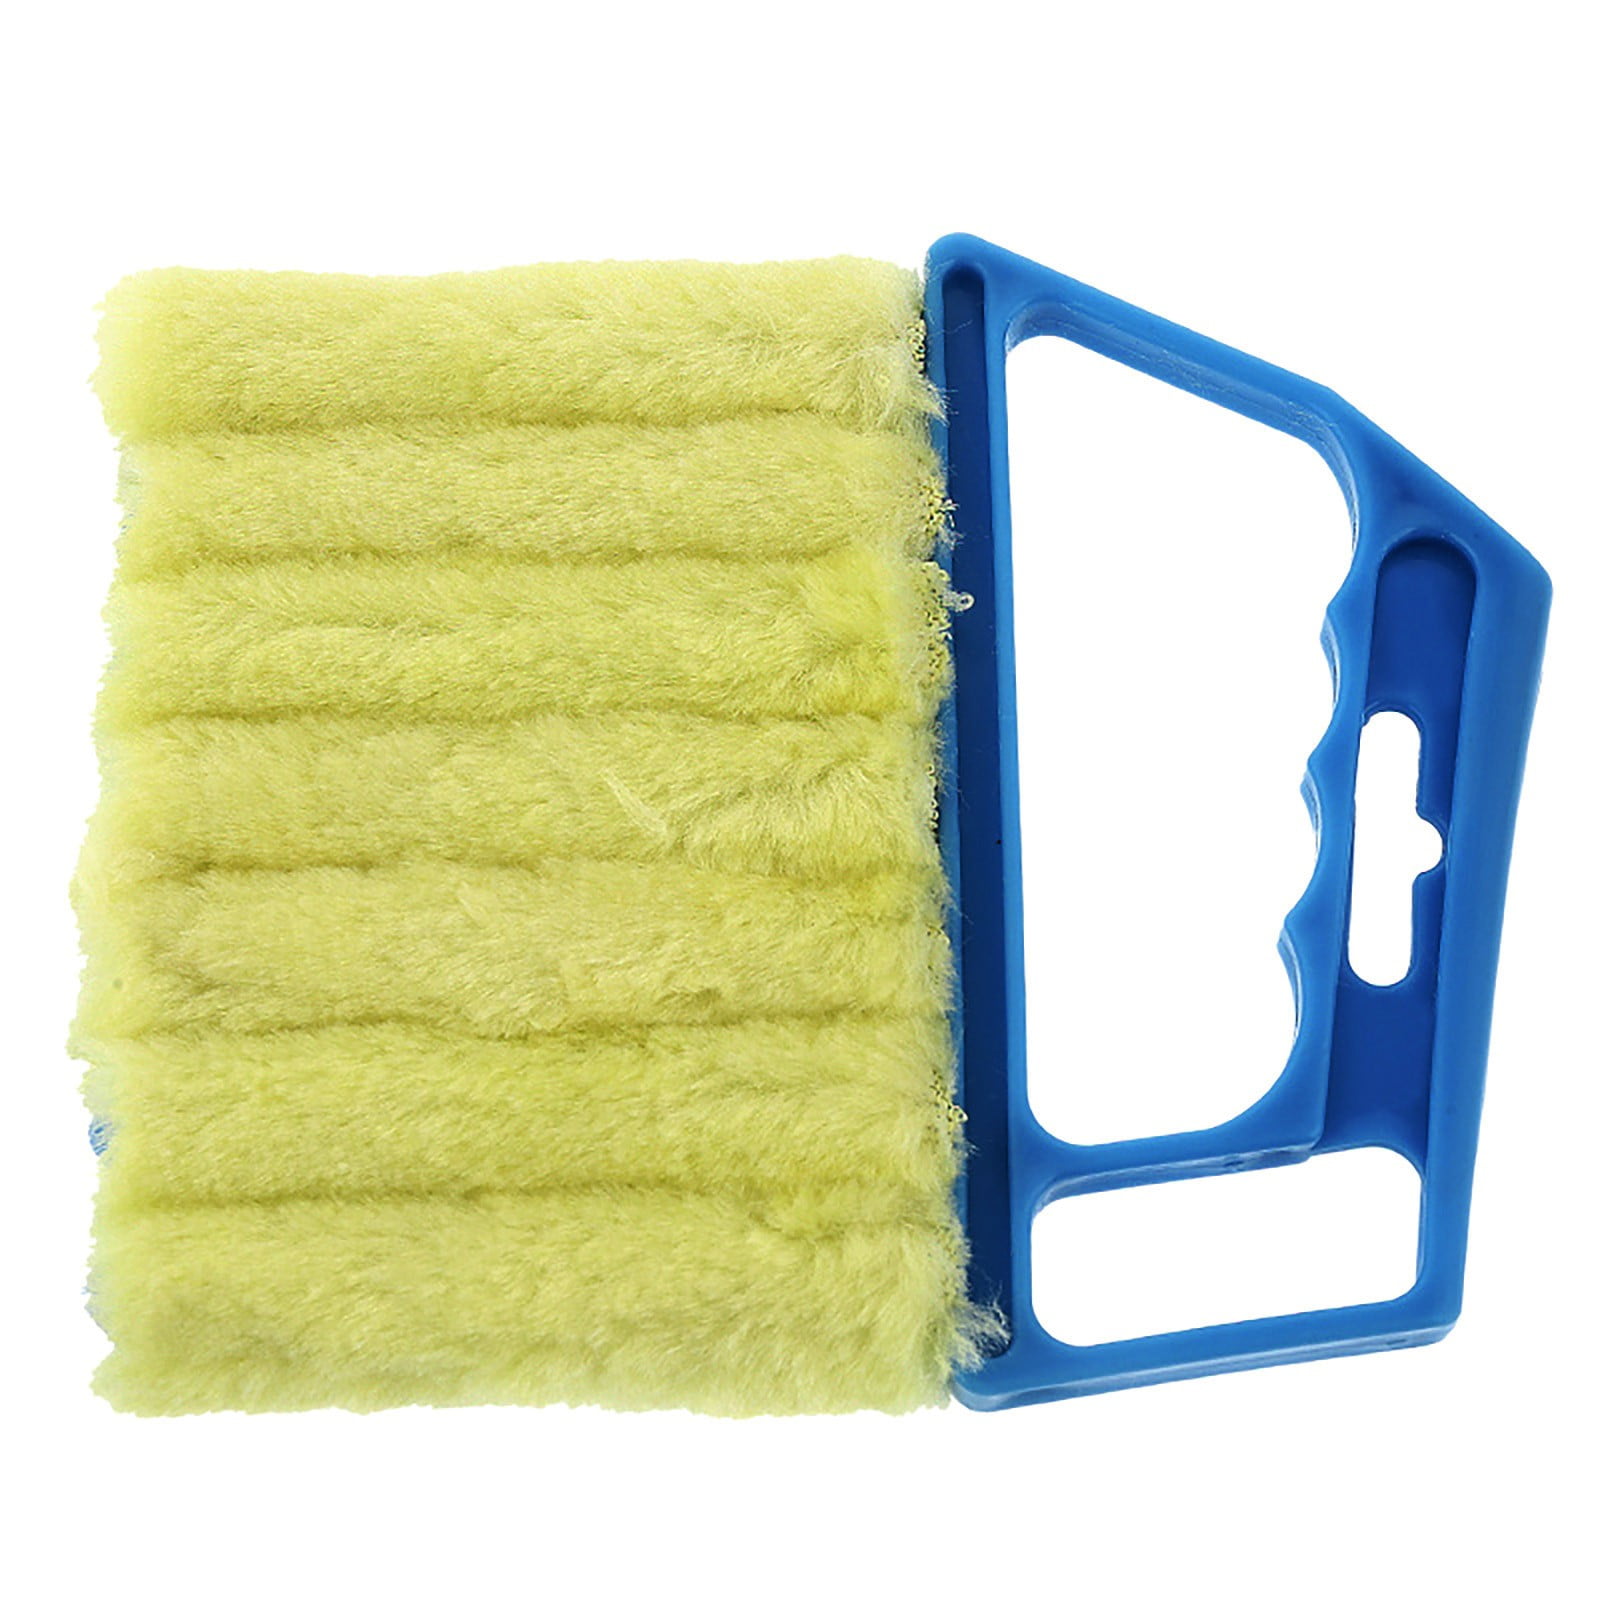 ProTool Blind Cleaner Bill (12-510): Blind Cleaning